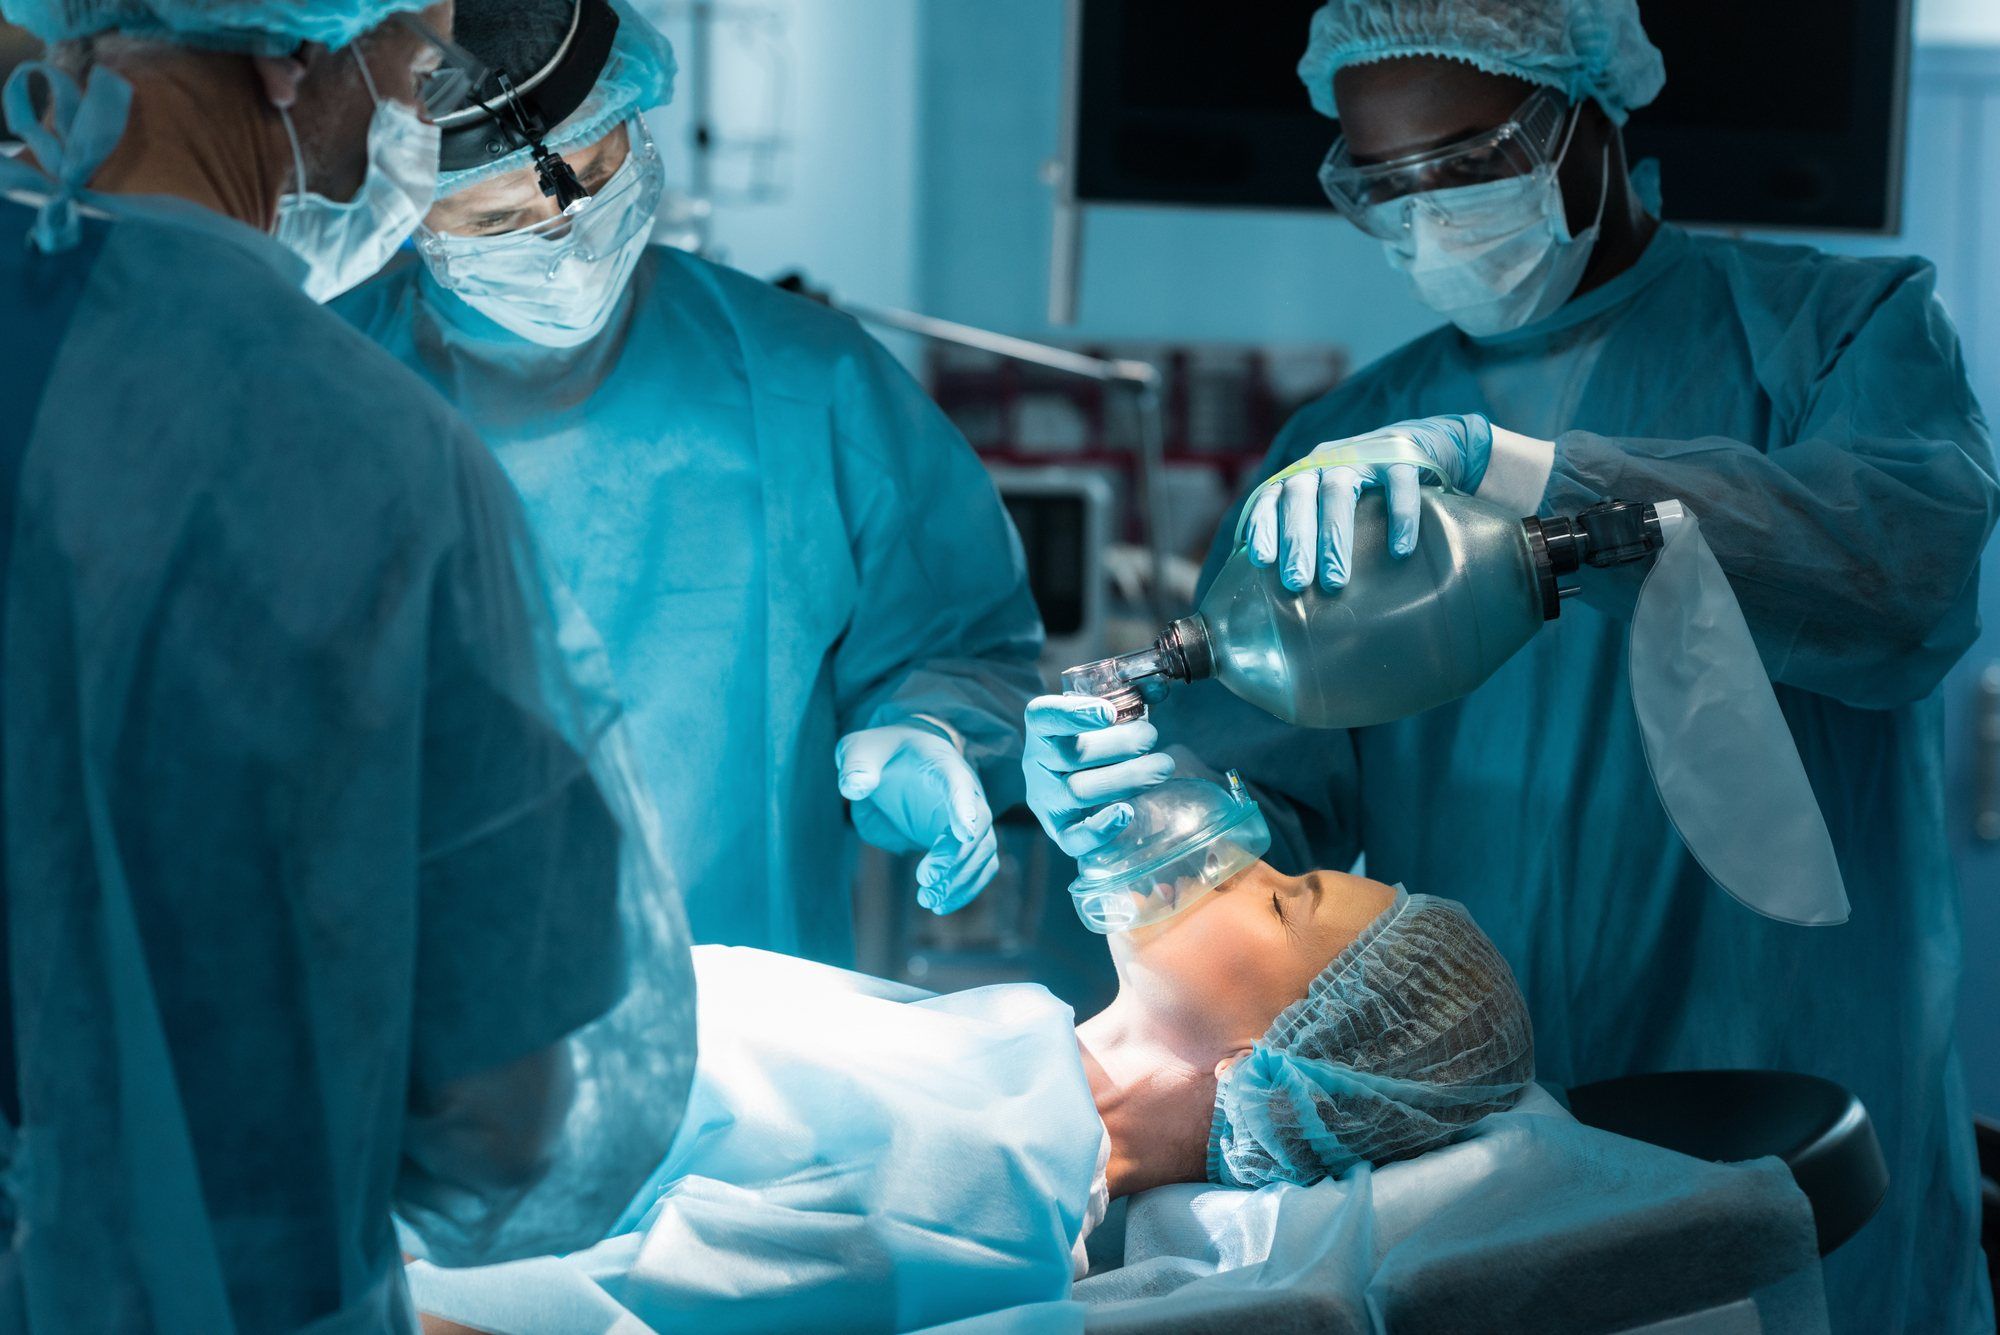 Woman undergoing anesthesia before surgery